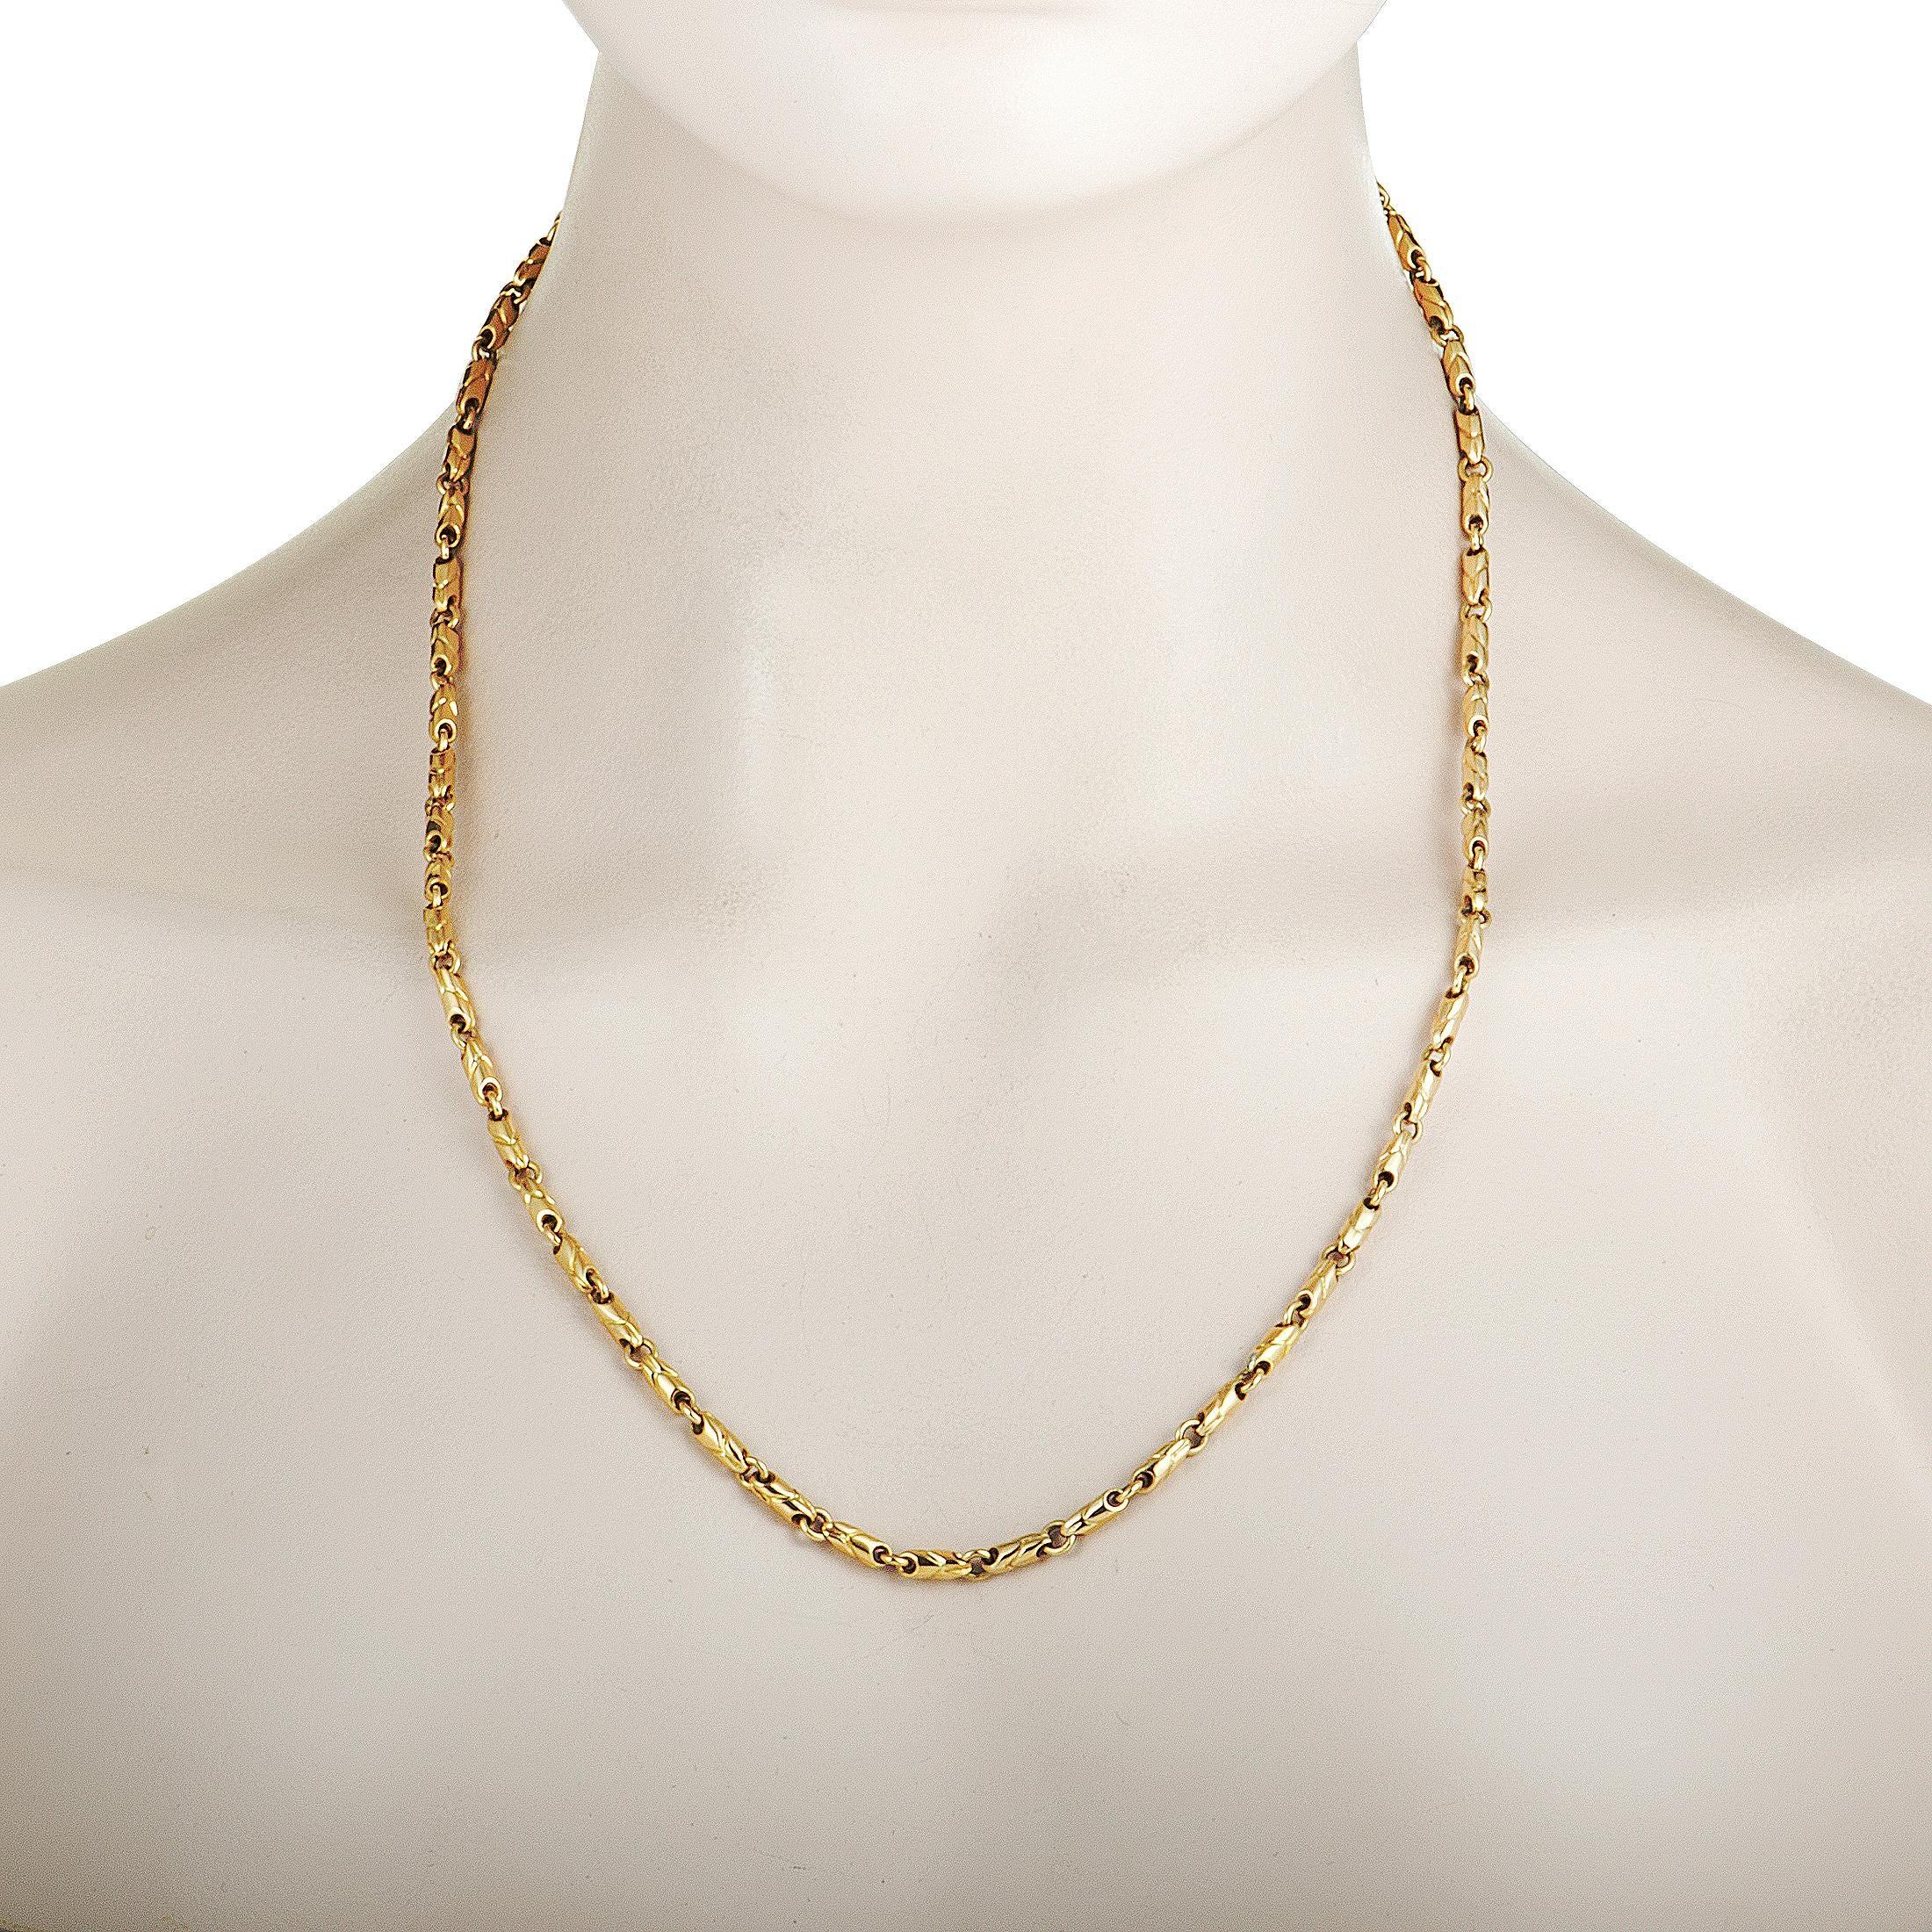 Add a sublime touch of elegant glisten to your ensembles with this exquisite chain necklace from Bvlgari that is designed in an exceptionally refined fashion and presented in luxurious 18K yellow gold. The necklace weighs 42.4 grams.
Included Items: